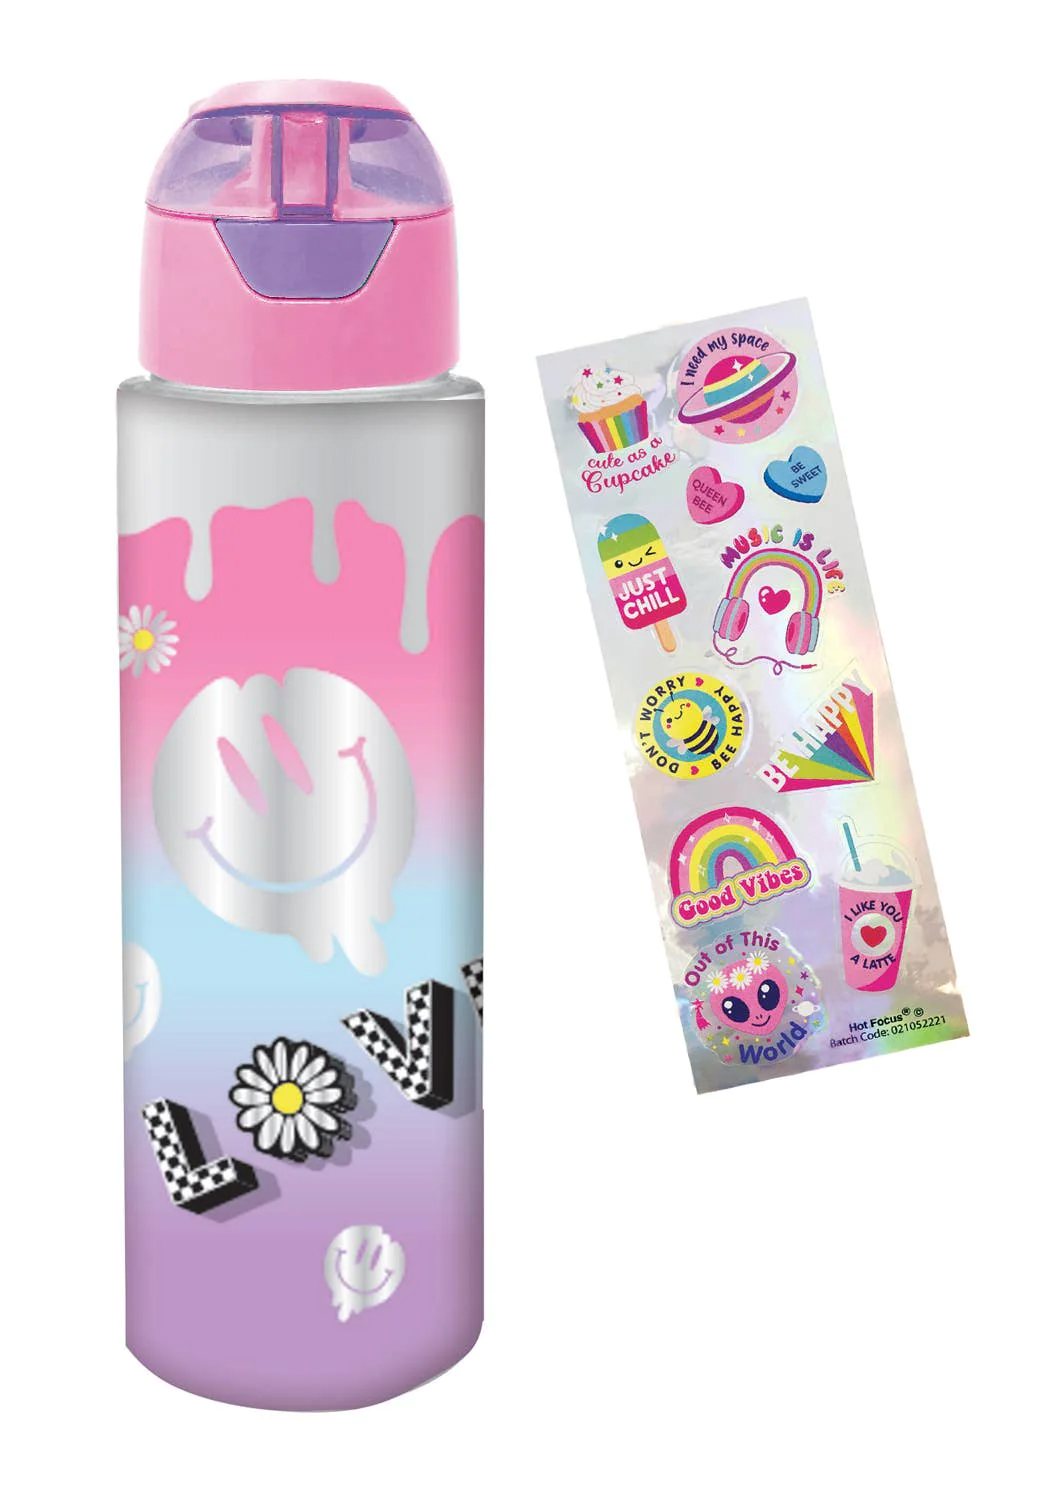 H2O Bottle & Sticker, Cool Vibes